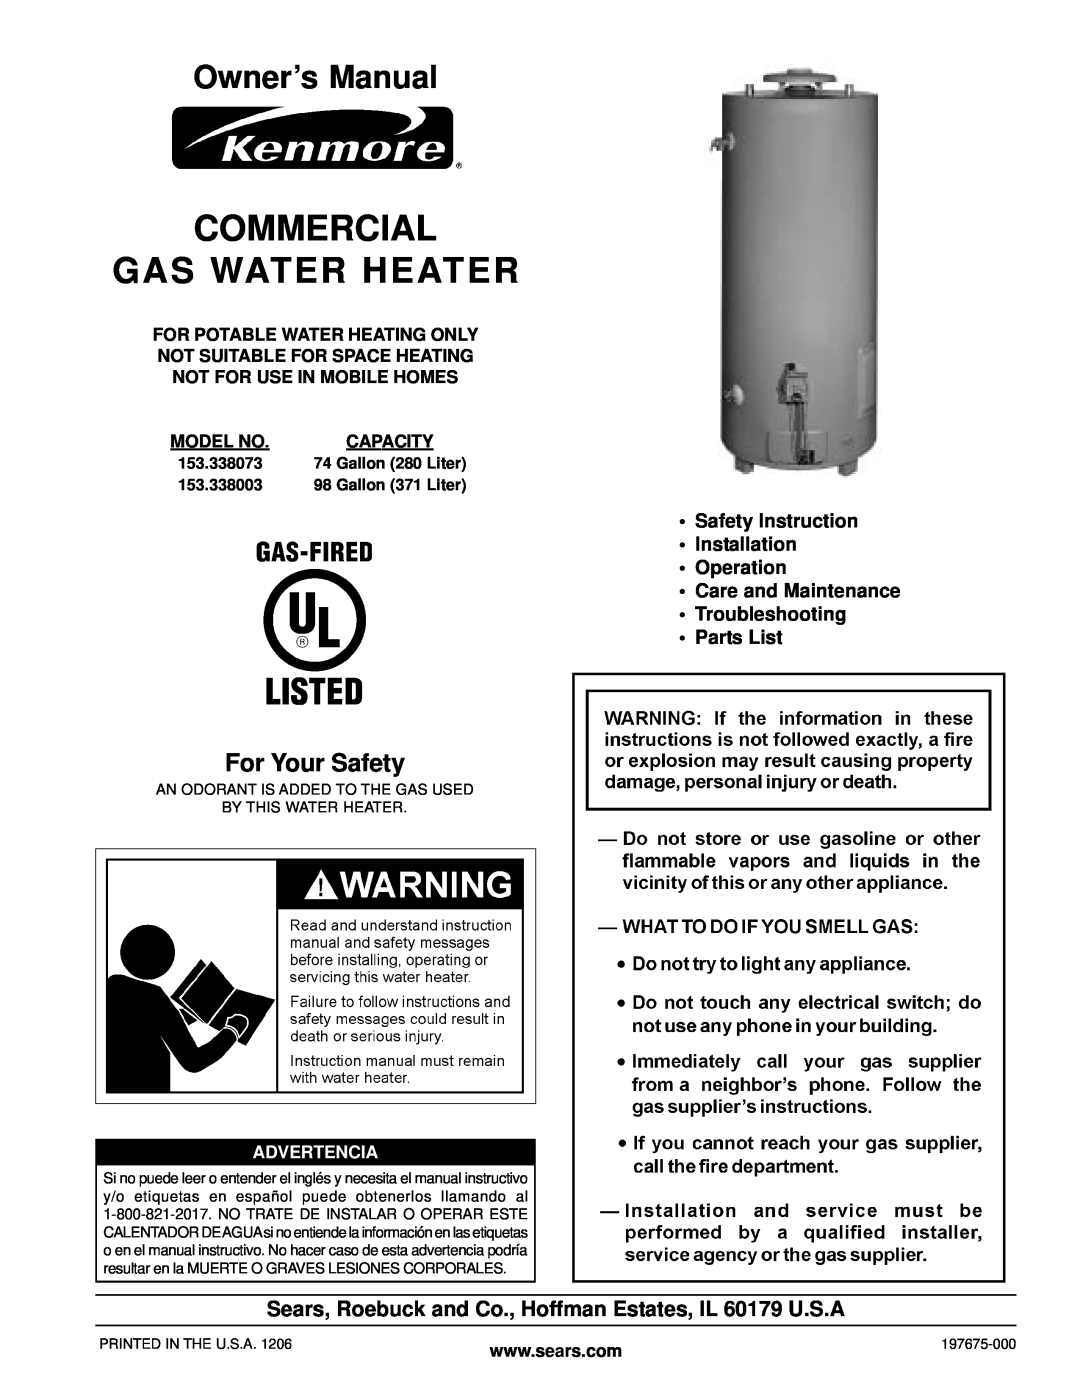 Kenmore 153.338073 owner manual For Your Safety, Commercial Gas Water Heater, Safety Instruction Installation Operation 